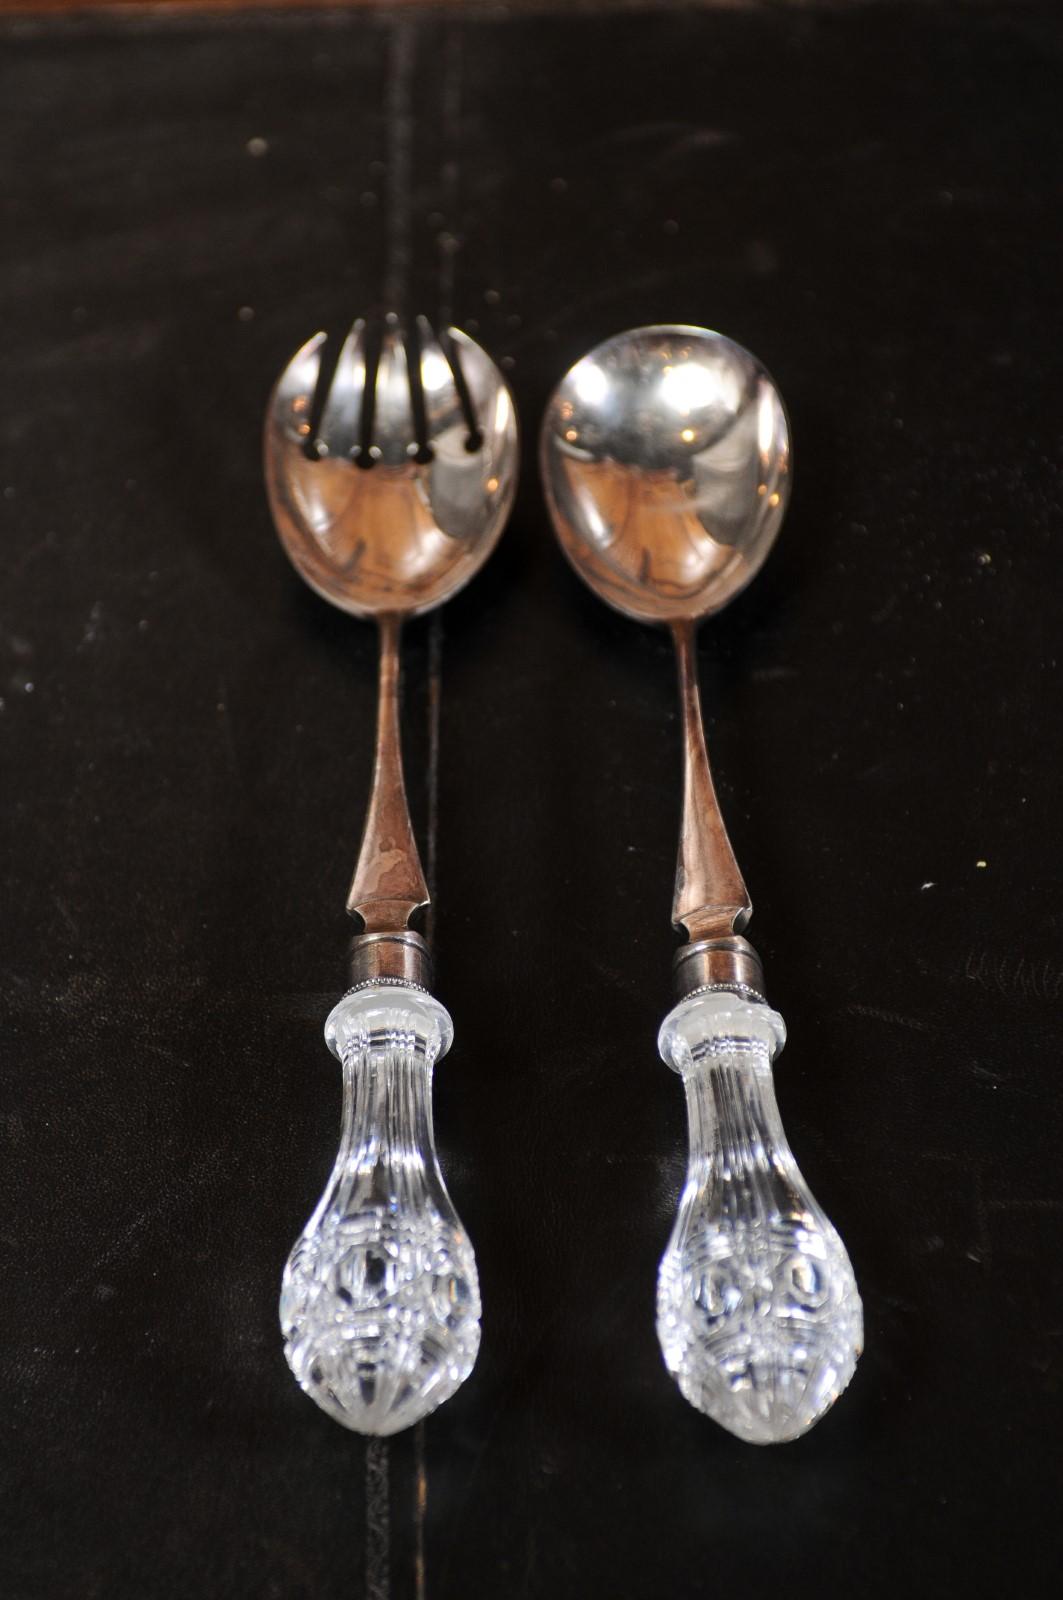 A pair of English Victorian period fine silver serving spoons from the 19th century, with glass handles. Created in England during the reign of Queen Victoria, each of this pair of serving spoons is adorned with a cut glass handle perfectly